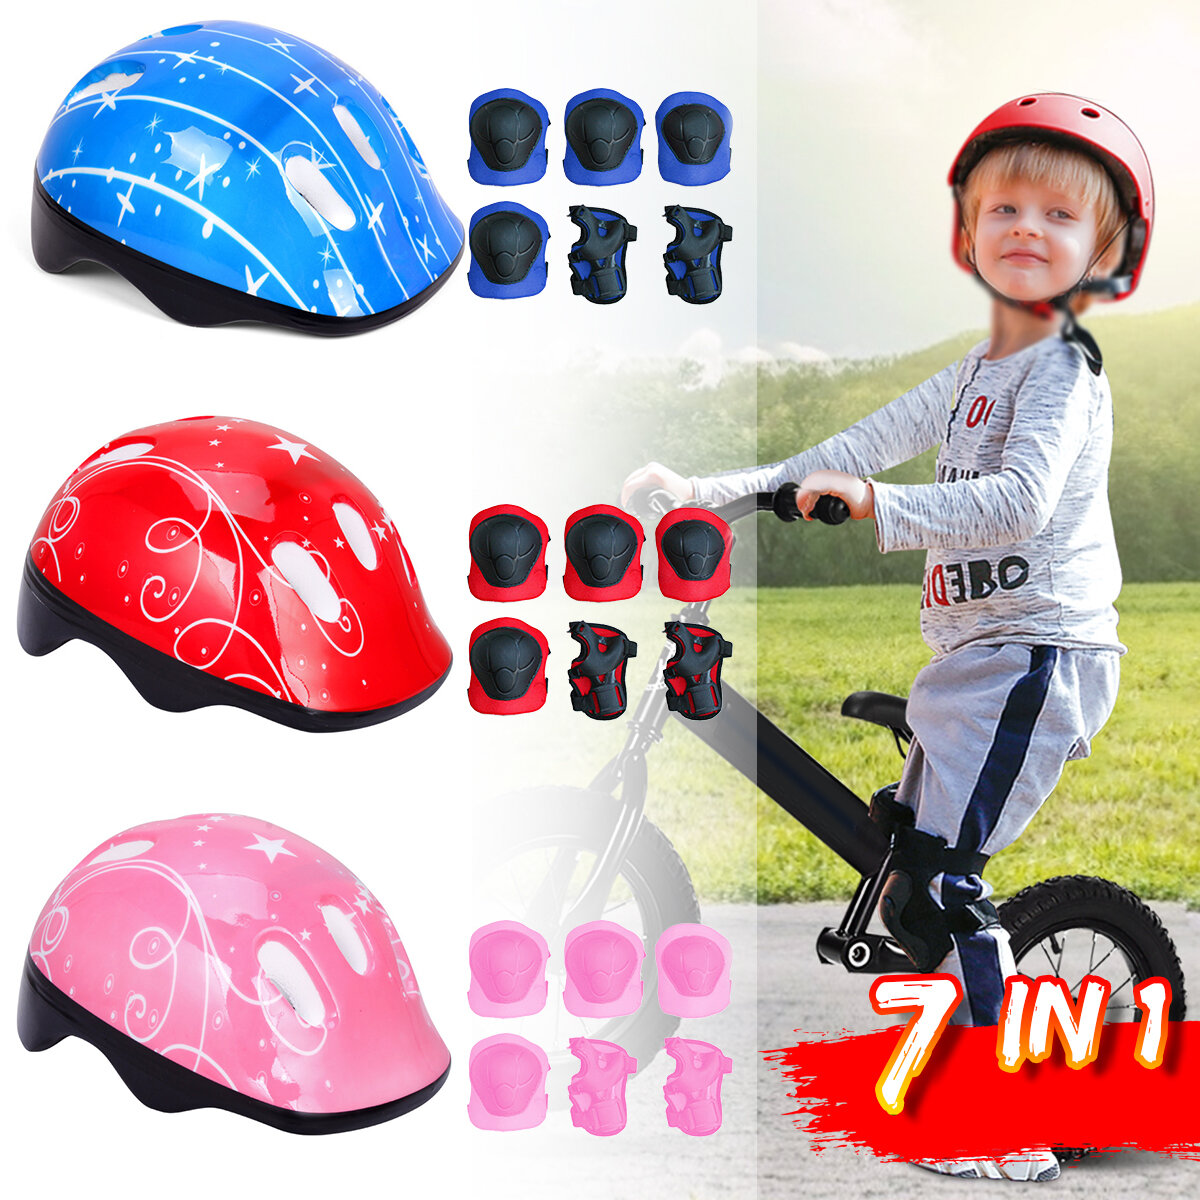 7 IN 1 Kids's Balance Bike Helmet Kits With Protect Knee Wrist Elbow Pads Roller Skating Protective 